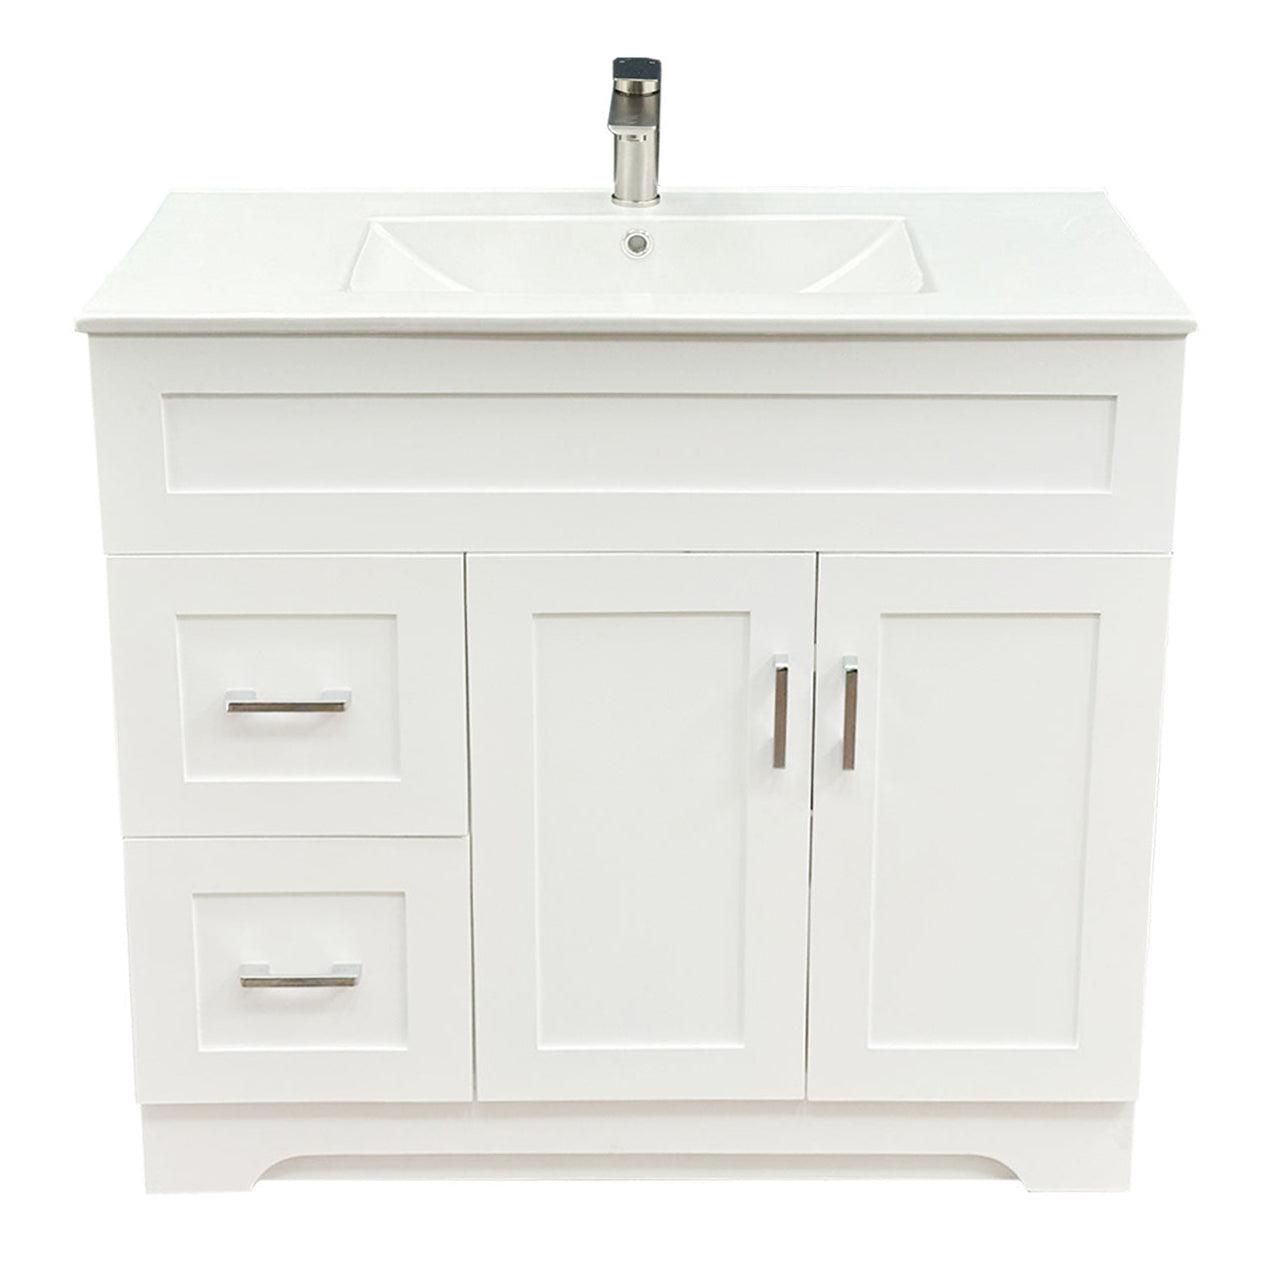 Marius 36" Modern Single Bathroom Vanity with Ceramic Sink, Include Two Doors, White - Hbdepot